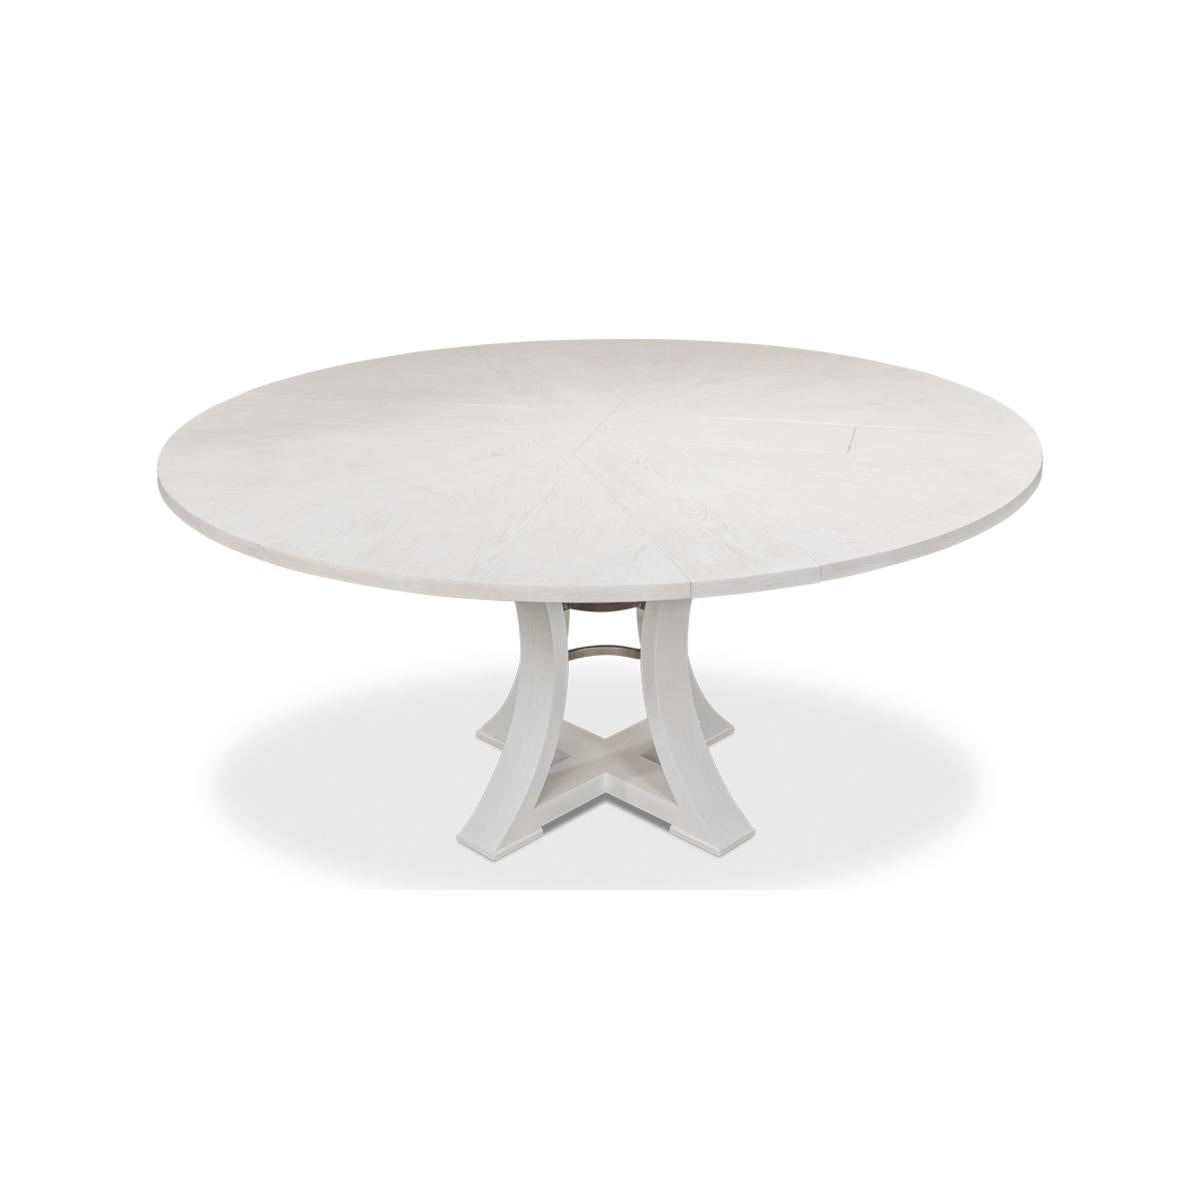 Wood Modern White Dining Table - 70 For Sale